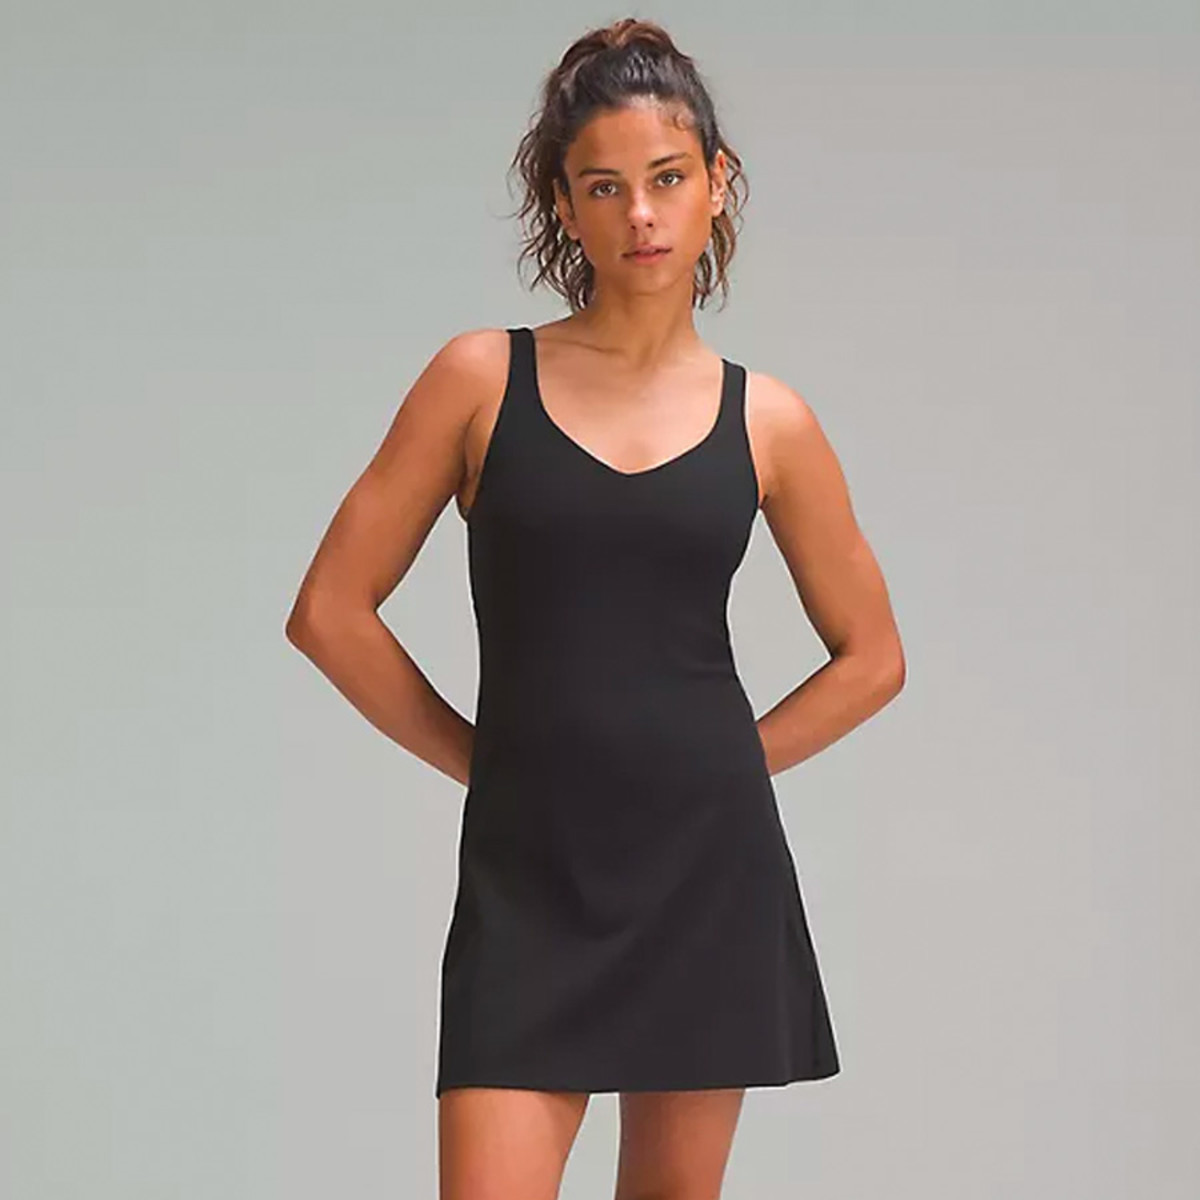 One of Alix Earle's 'When-in-Doubt' Date-Night Outfits, the Best Casual Little Black Dress, the lululemon Align Dress